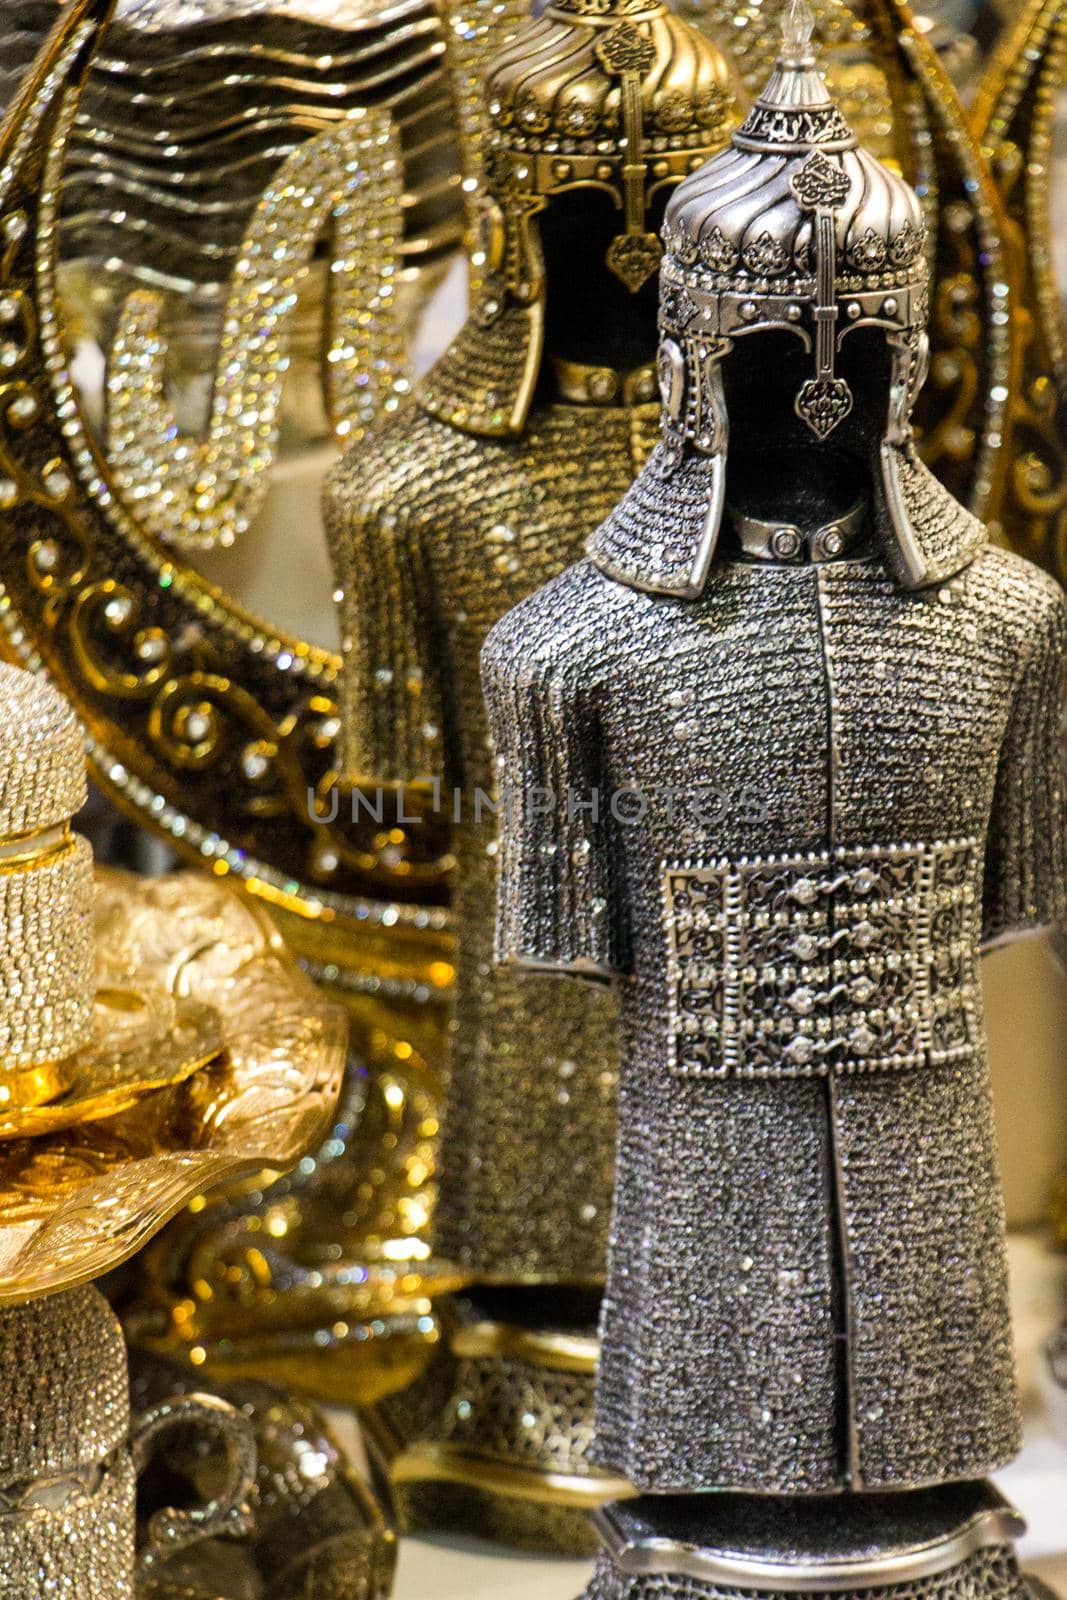 Medieval steel and gold colored armours on display by berkay